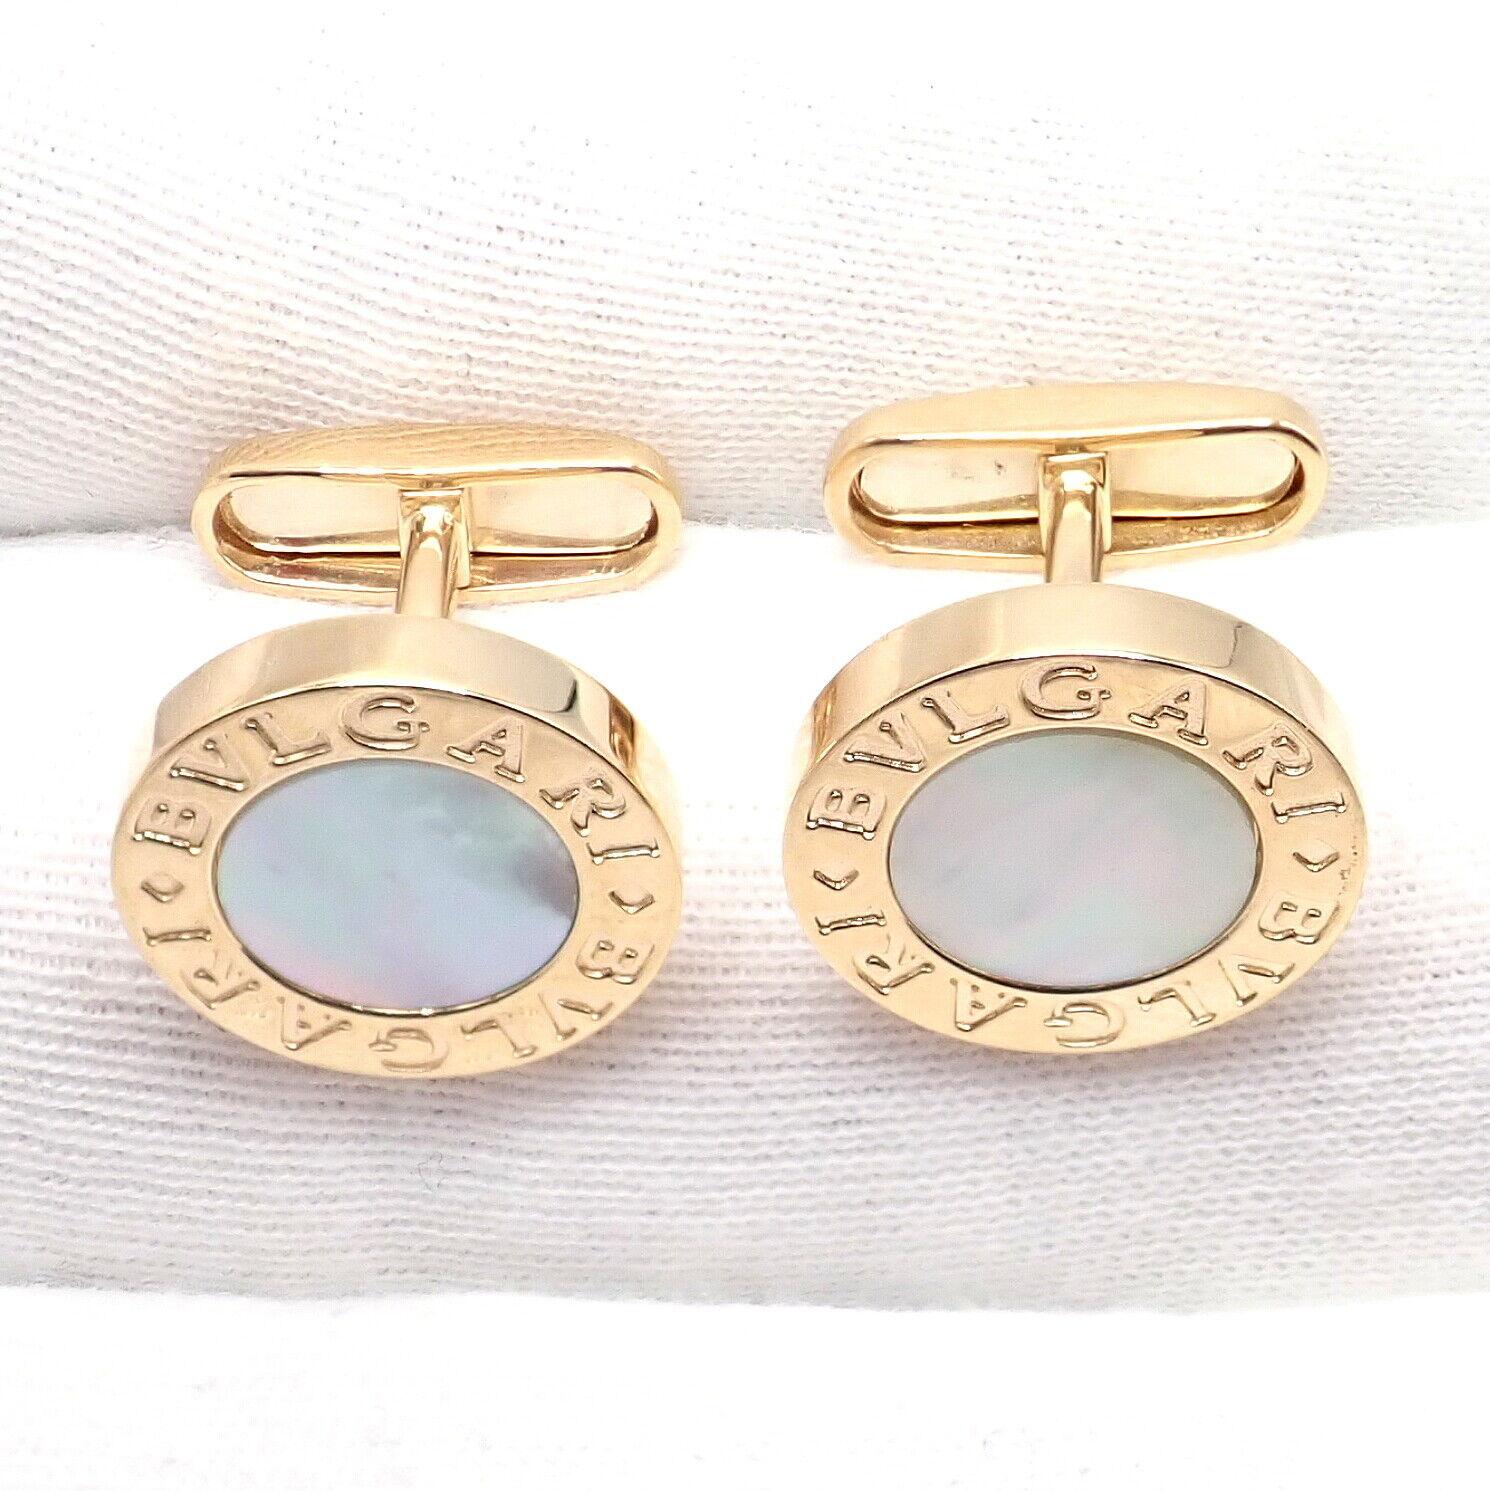 Bvlgari Bulgari Multicenter Mother Of Pearl Onyx Yellow Gold Cufflinks Kit Set In Excellent Condition For Sale In Holland, PA